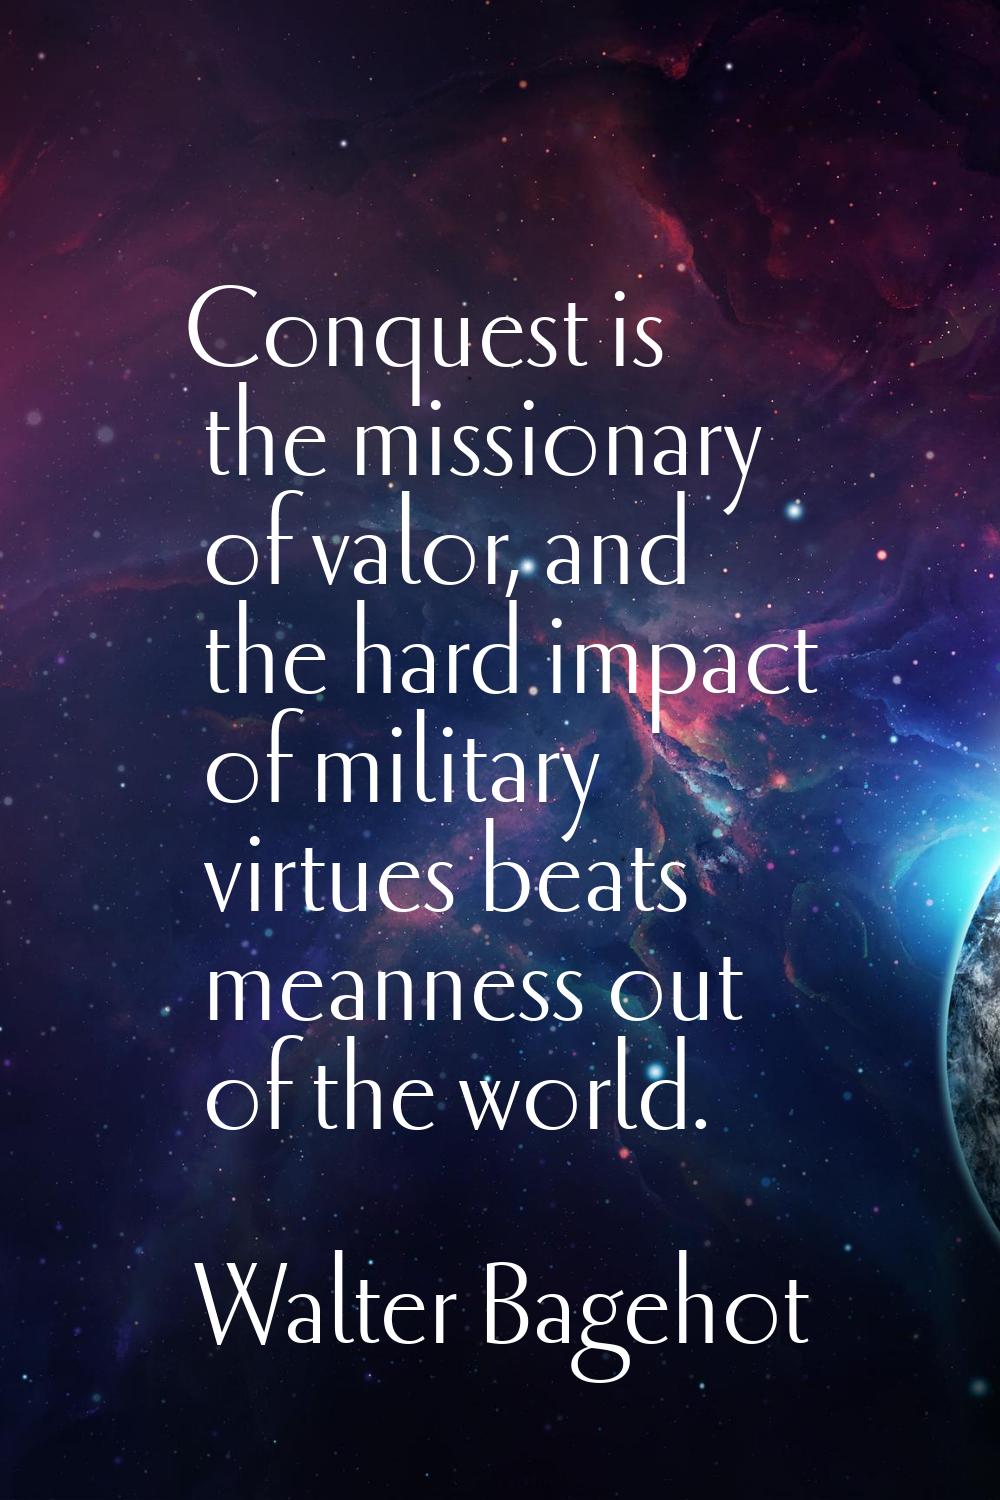 Conquest is the missionary of valor, and the hard impact of military virtues beats meanness out of 